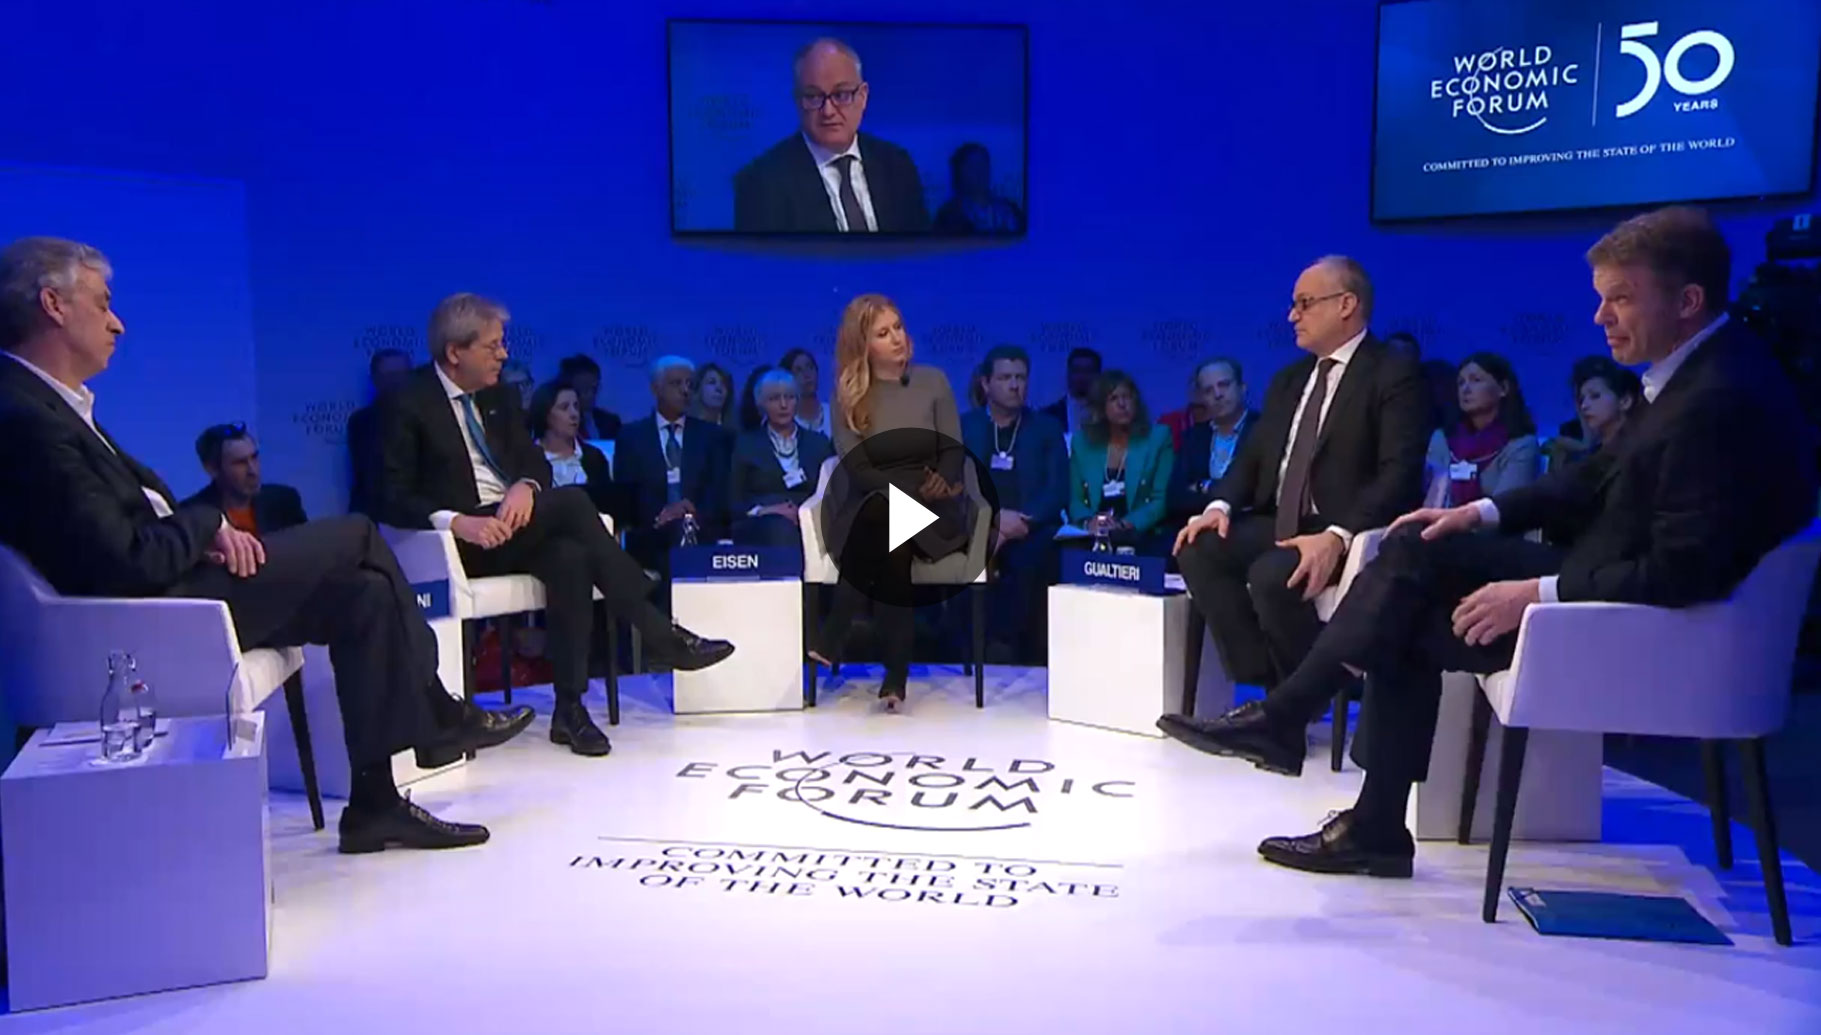 Roberto Gualtieri’s speech during the 50th Annual Meeting of the World Economic Forum in Davos, session on "Renewing Europes Growth after Brexit"